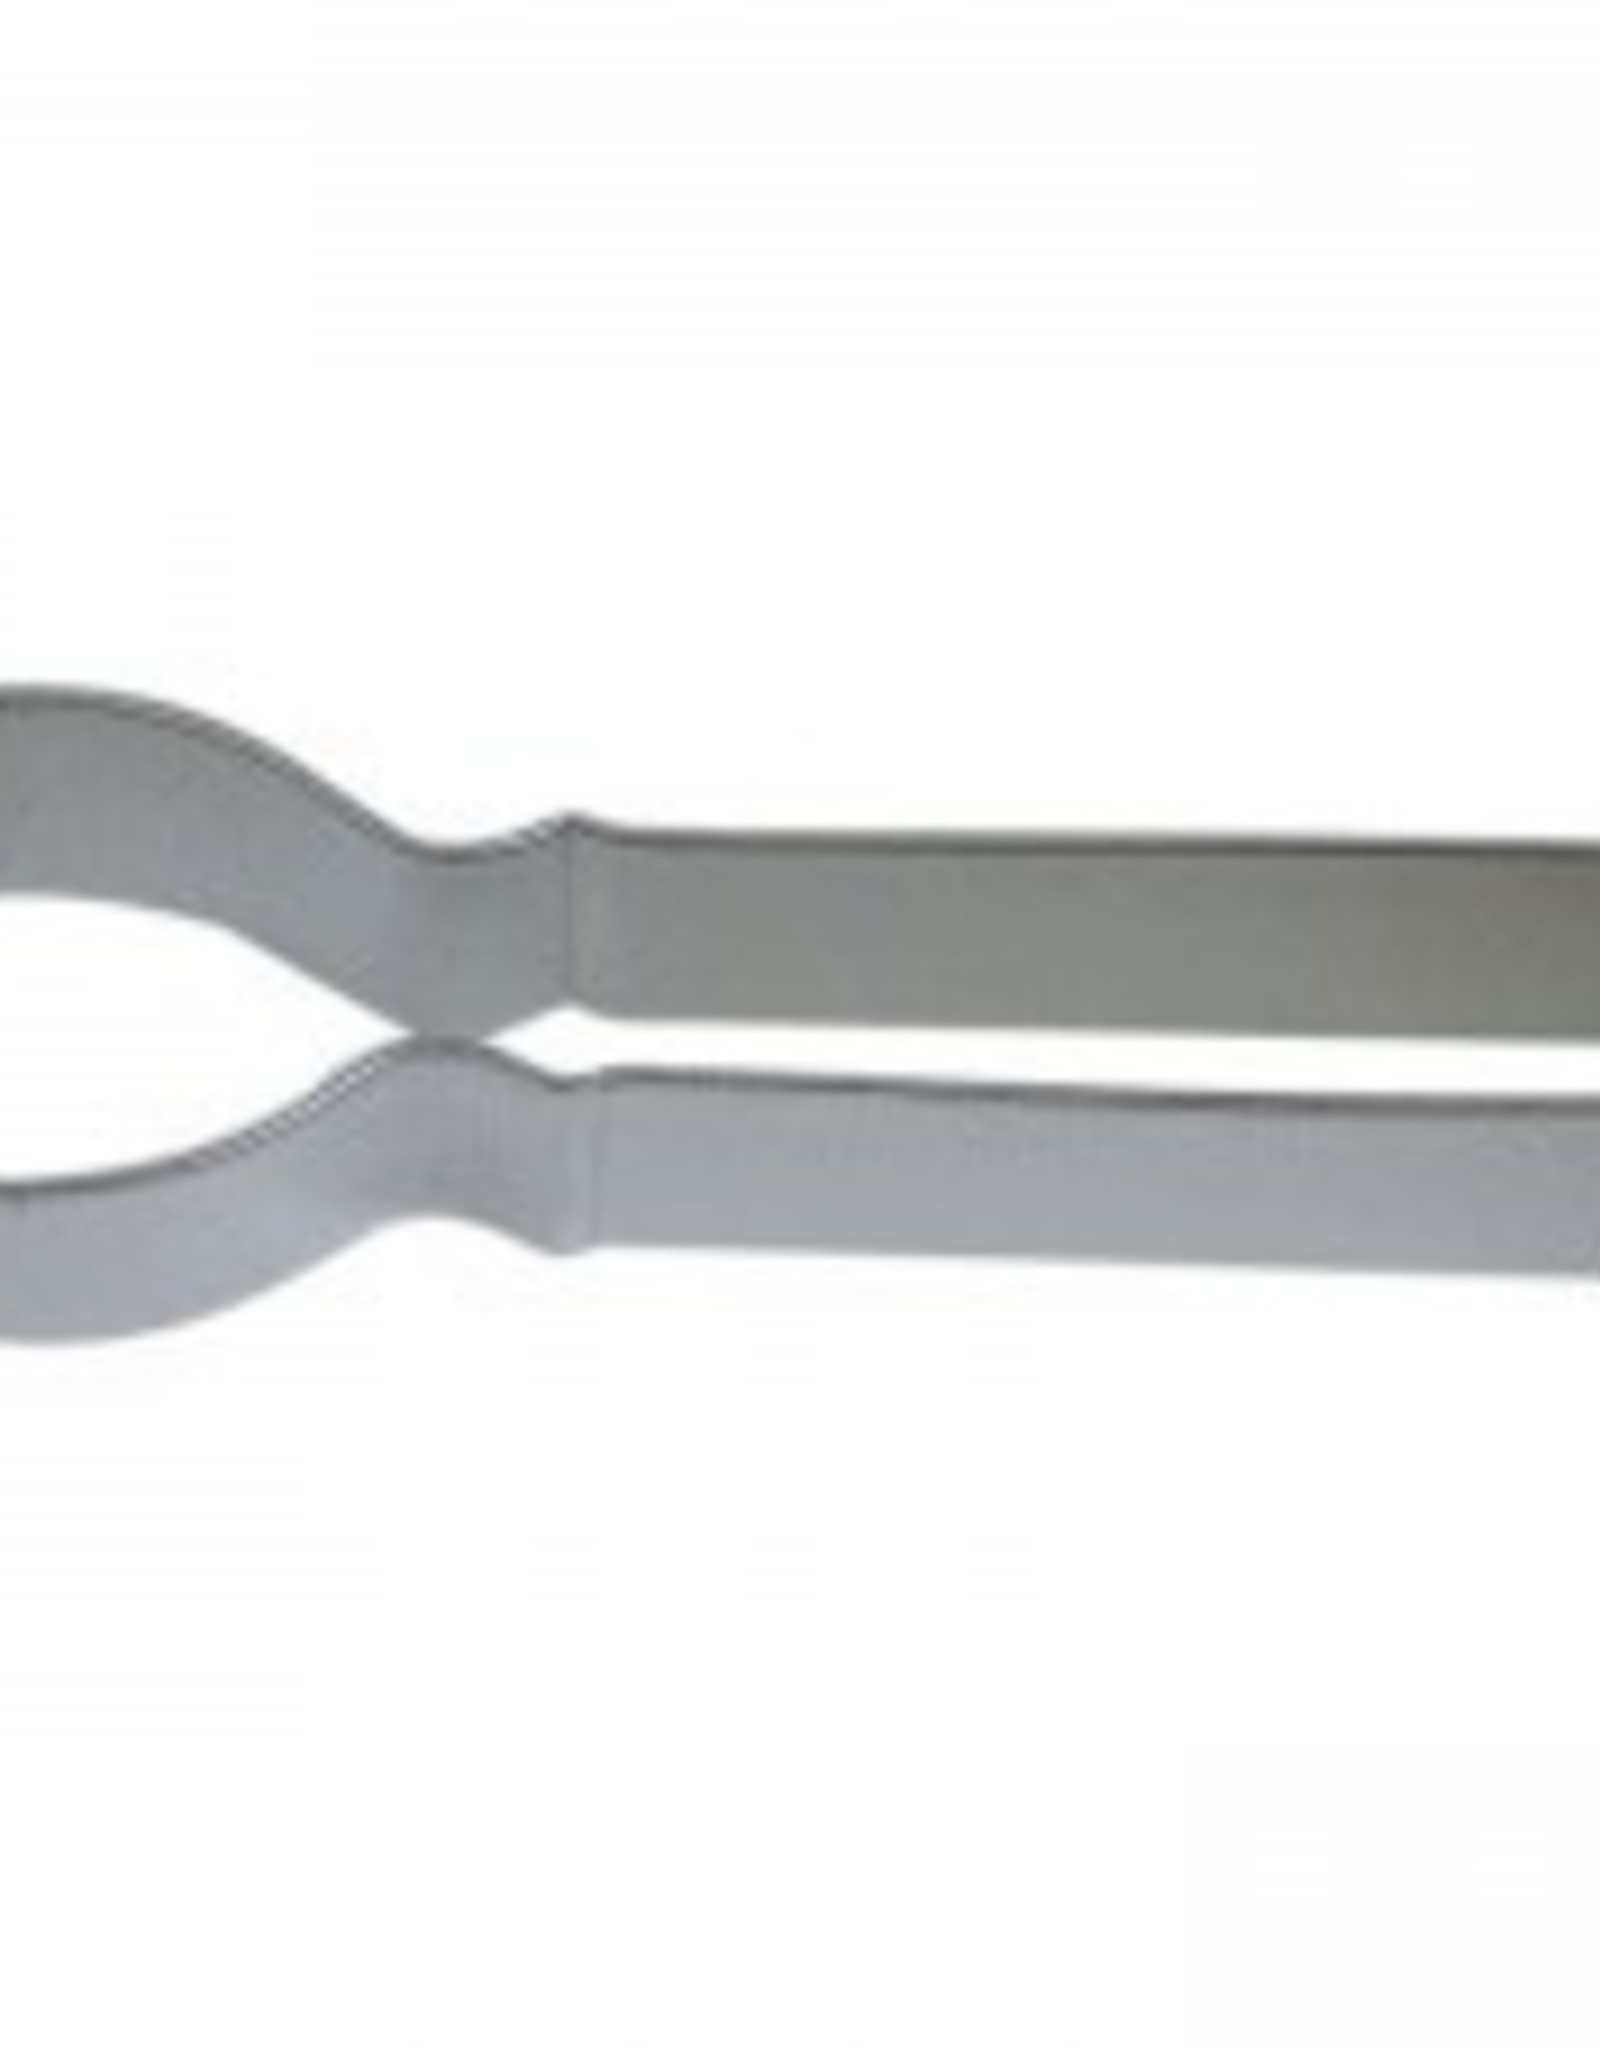 Spoon Cookie Cutter (6")